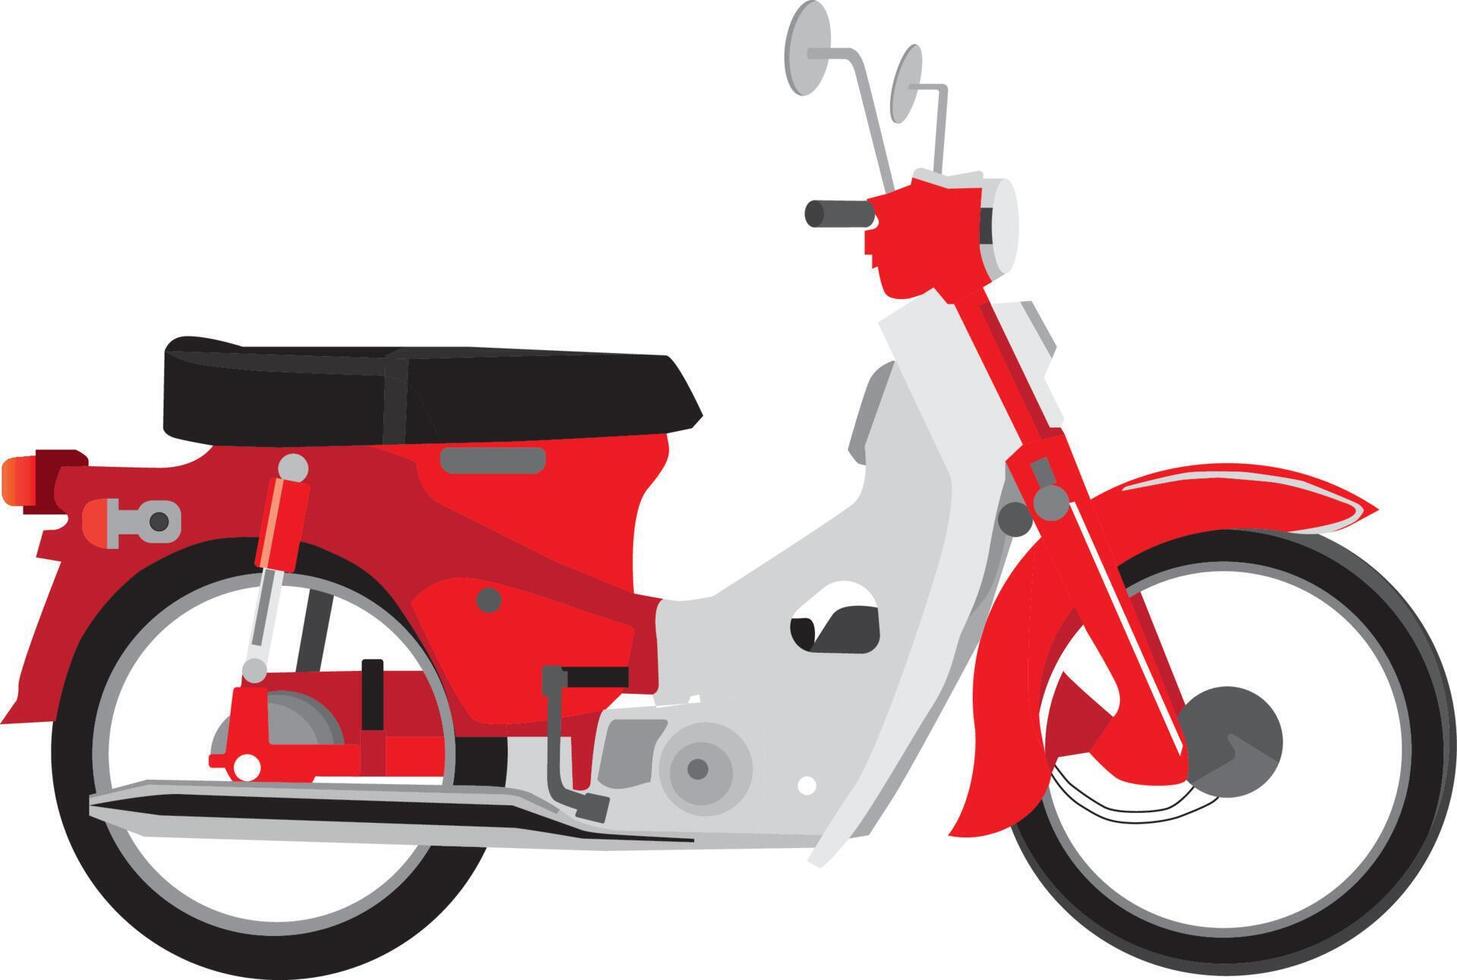 a classic motor in vector illustration design in red and white design